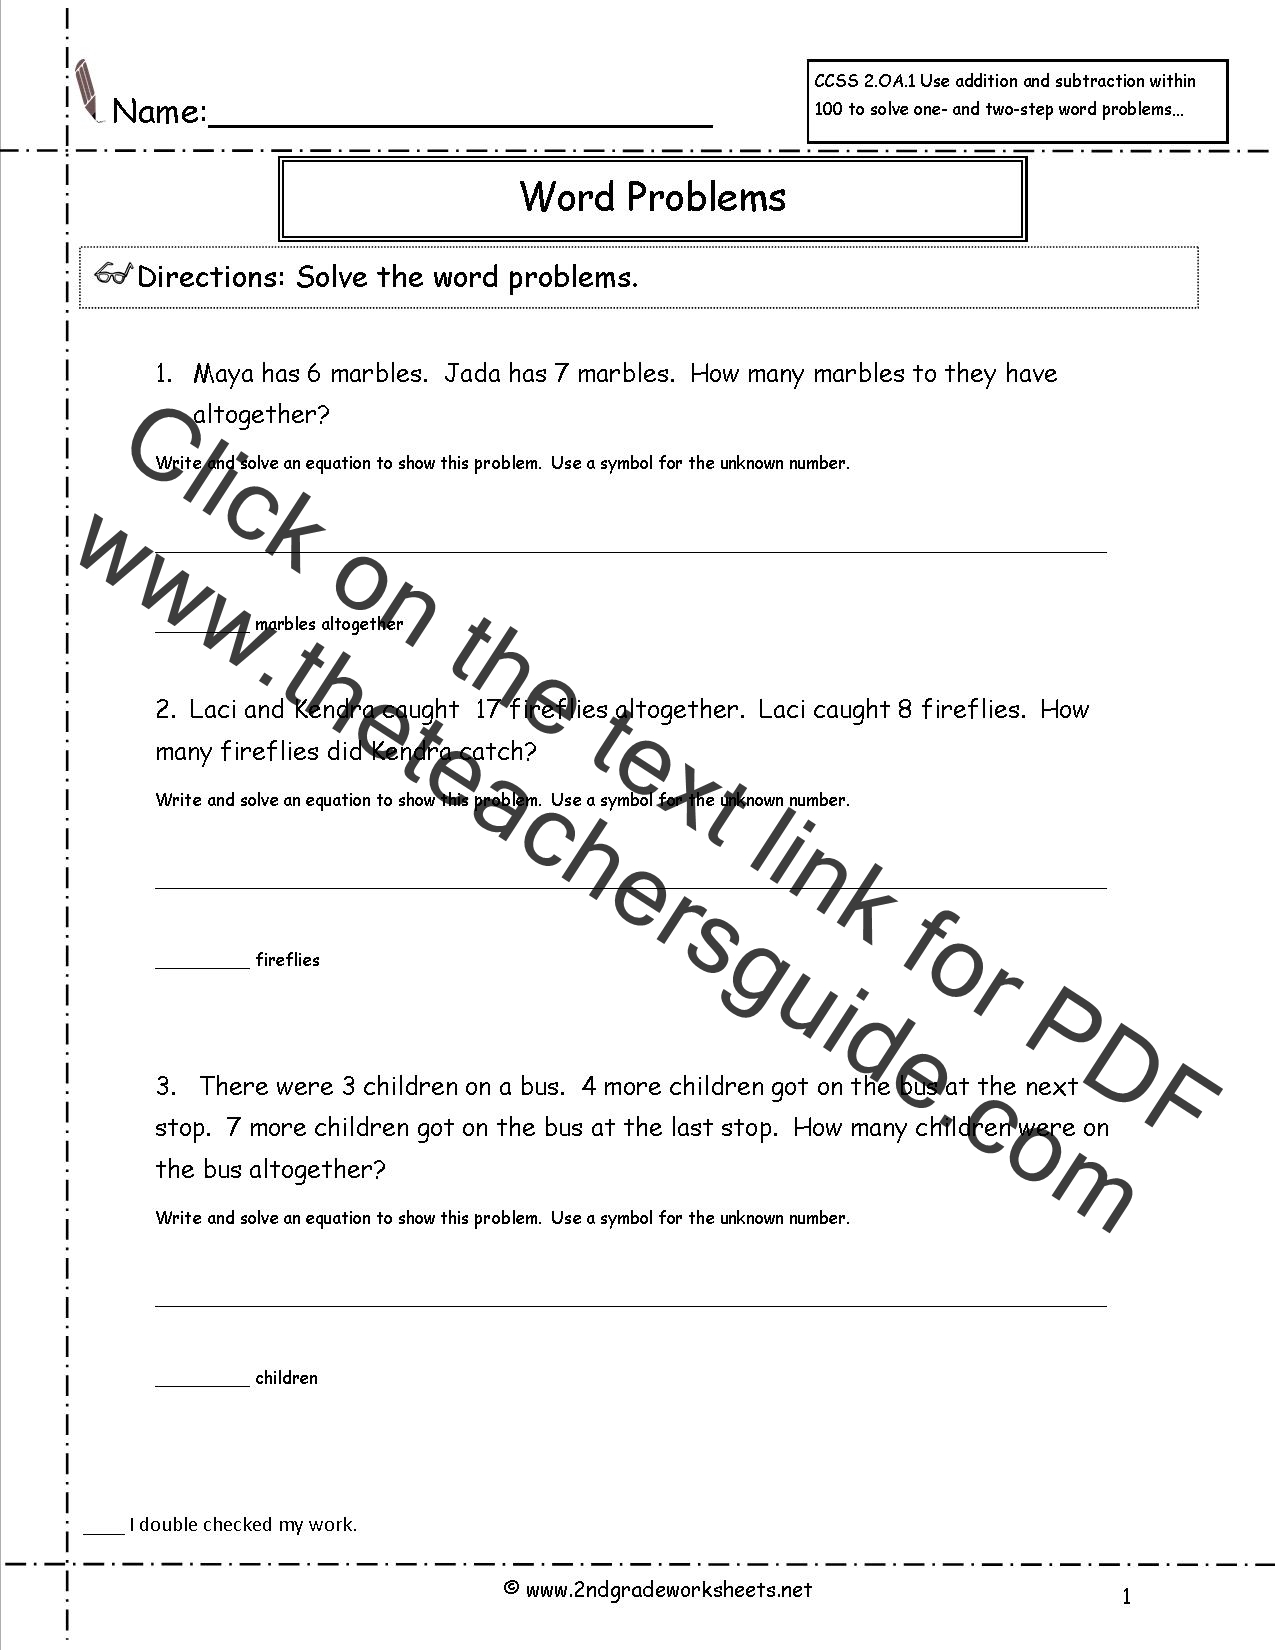 two-step-word-problems-worksheets-3rd-grade-statementwriter-web-fc2